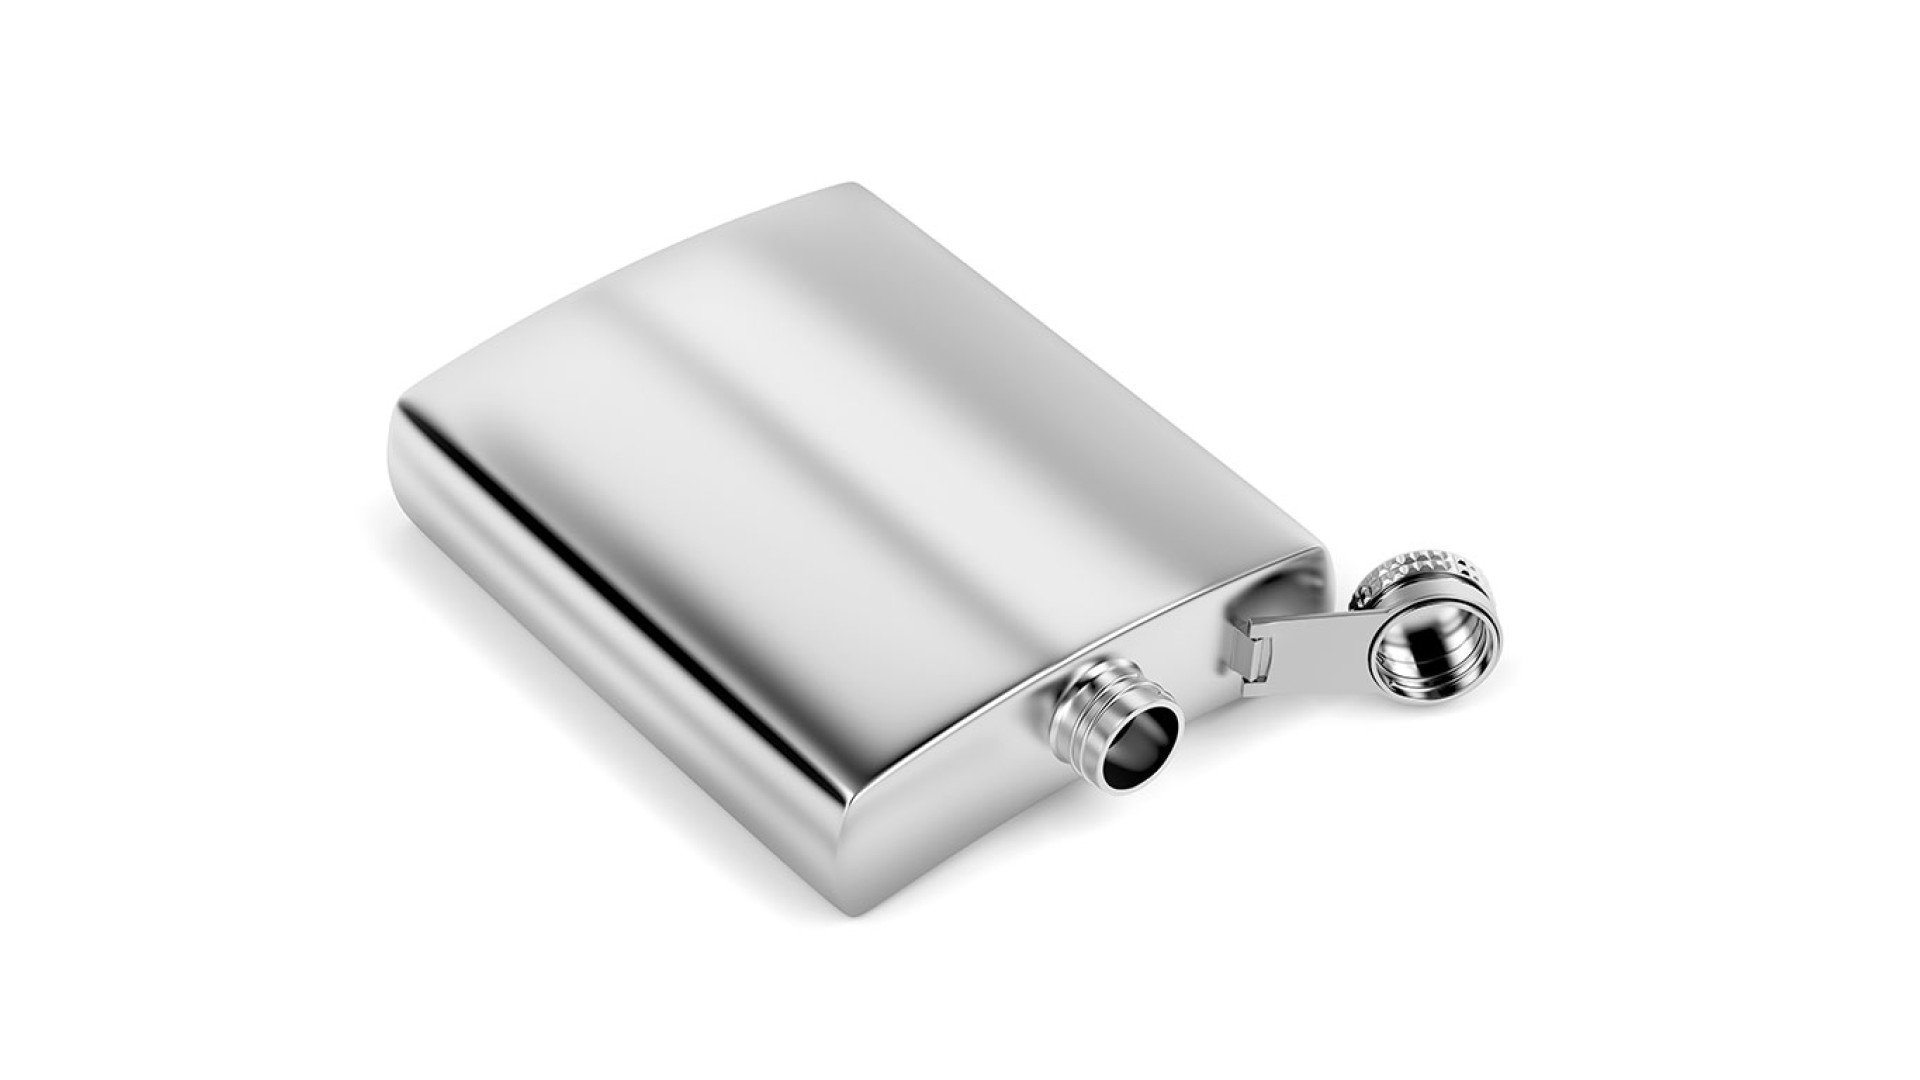 https://www.ckbproducts.com/image/cache/catalog/Ckb%20blog/is-a-flask-considered-an-open-container-1920x1080.jpg